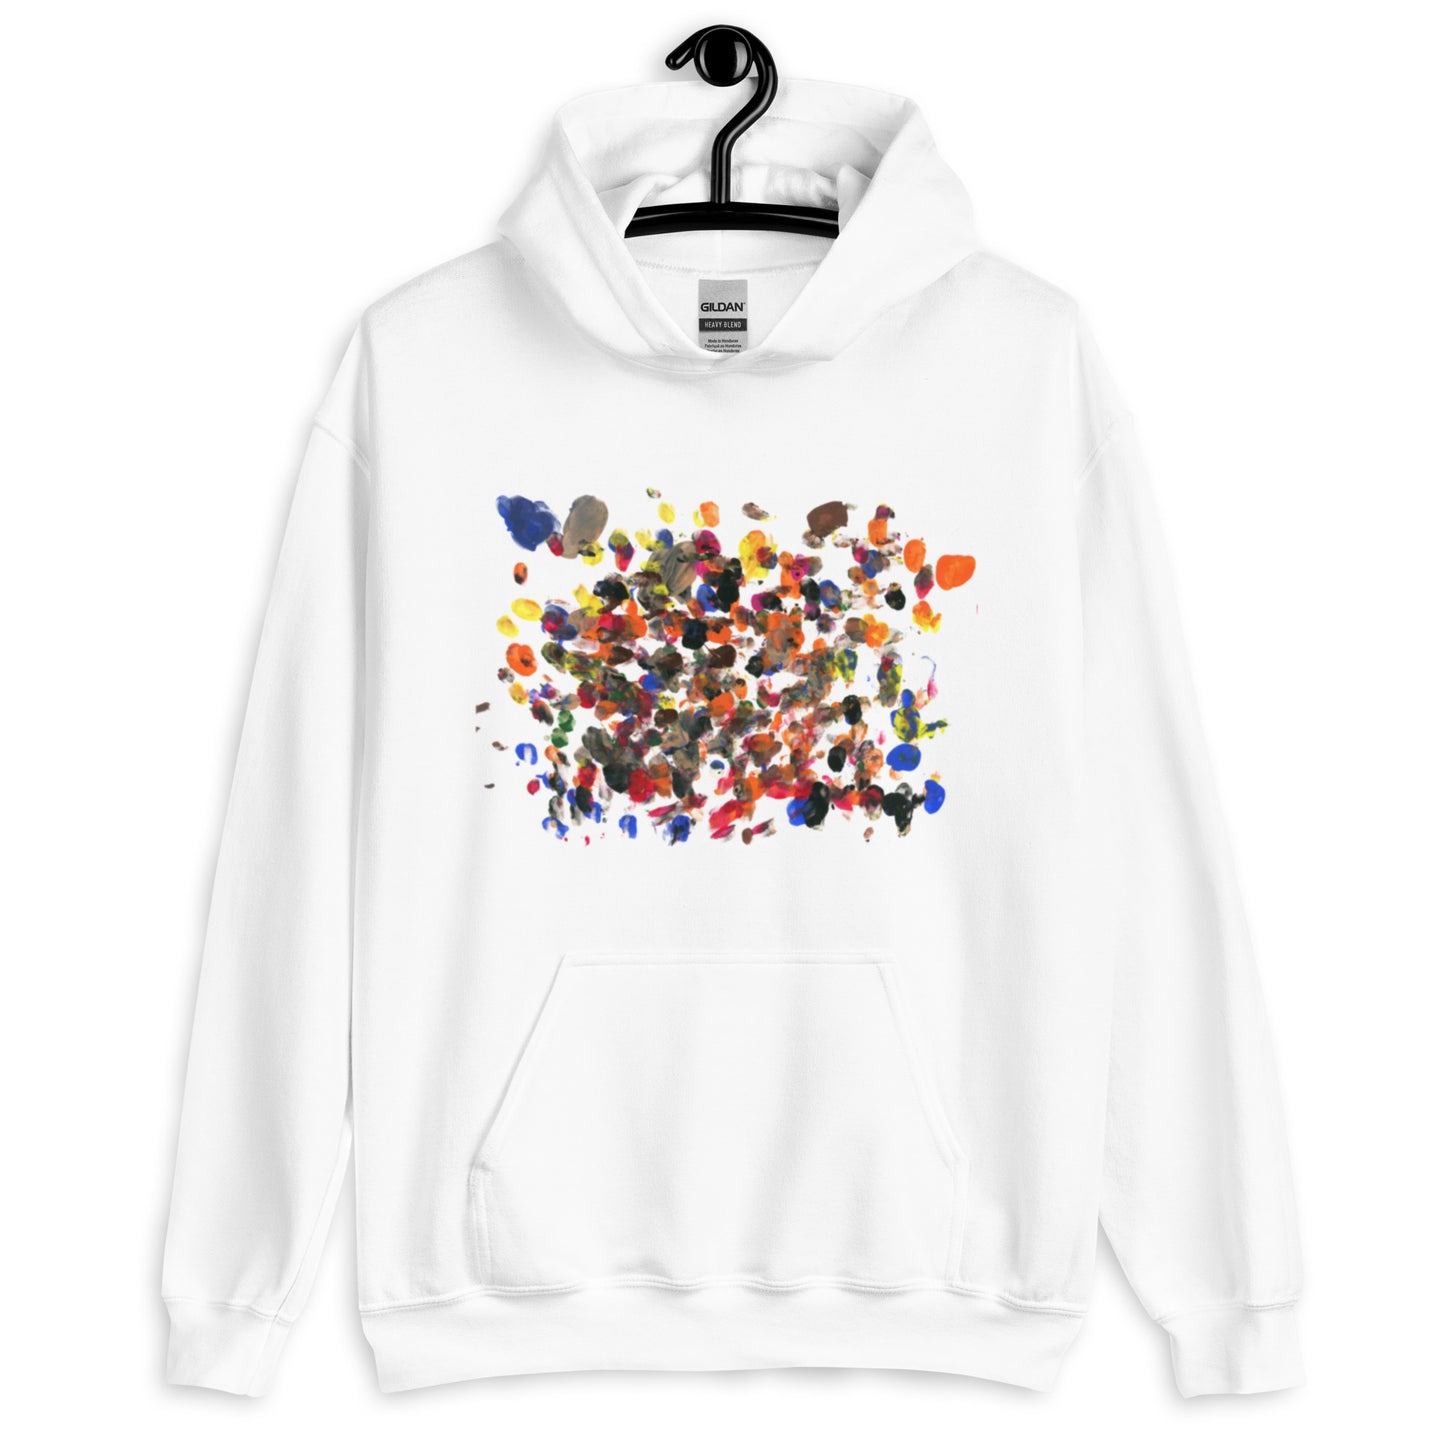 Hoodie - Design Created By Michael